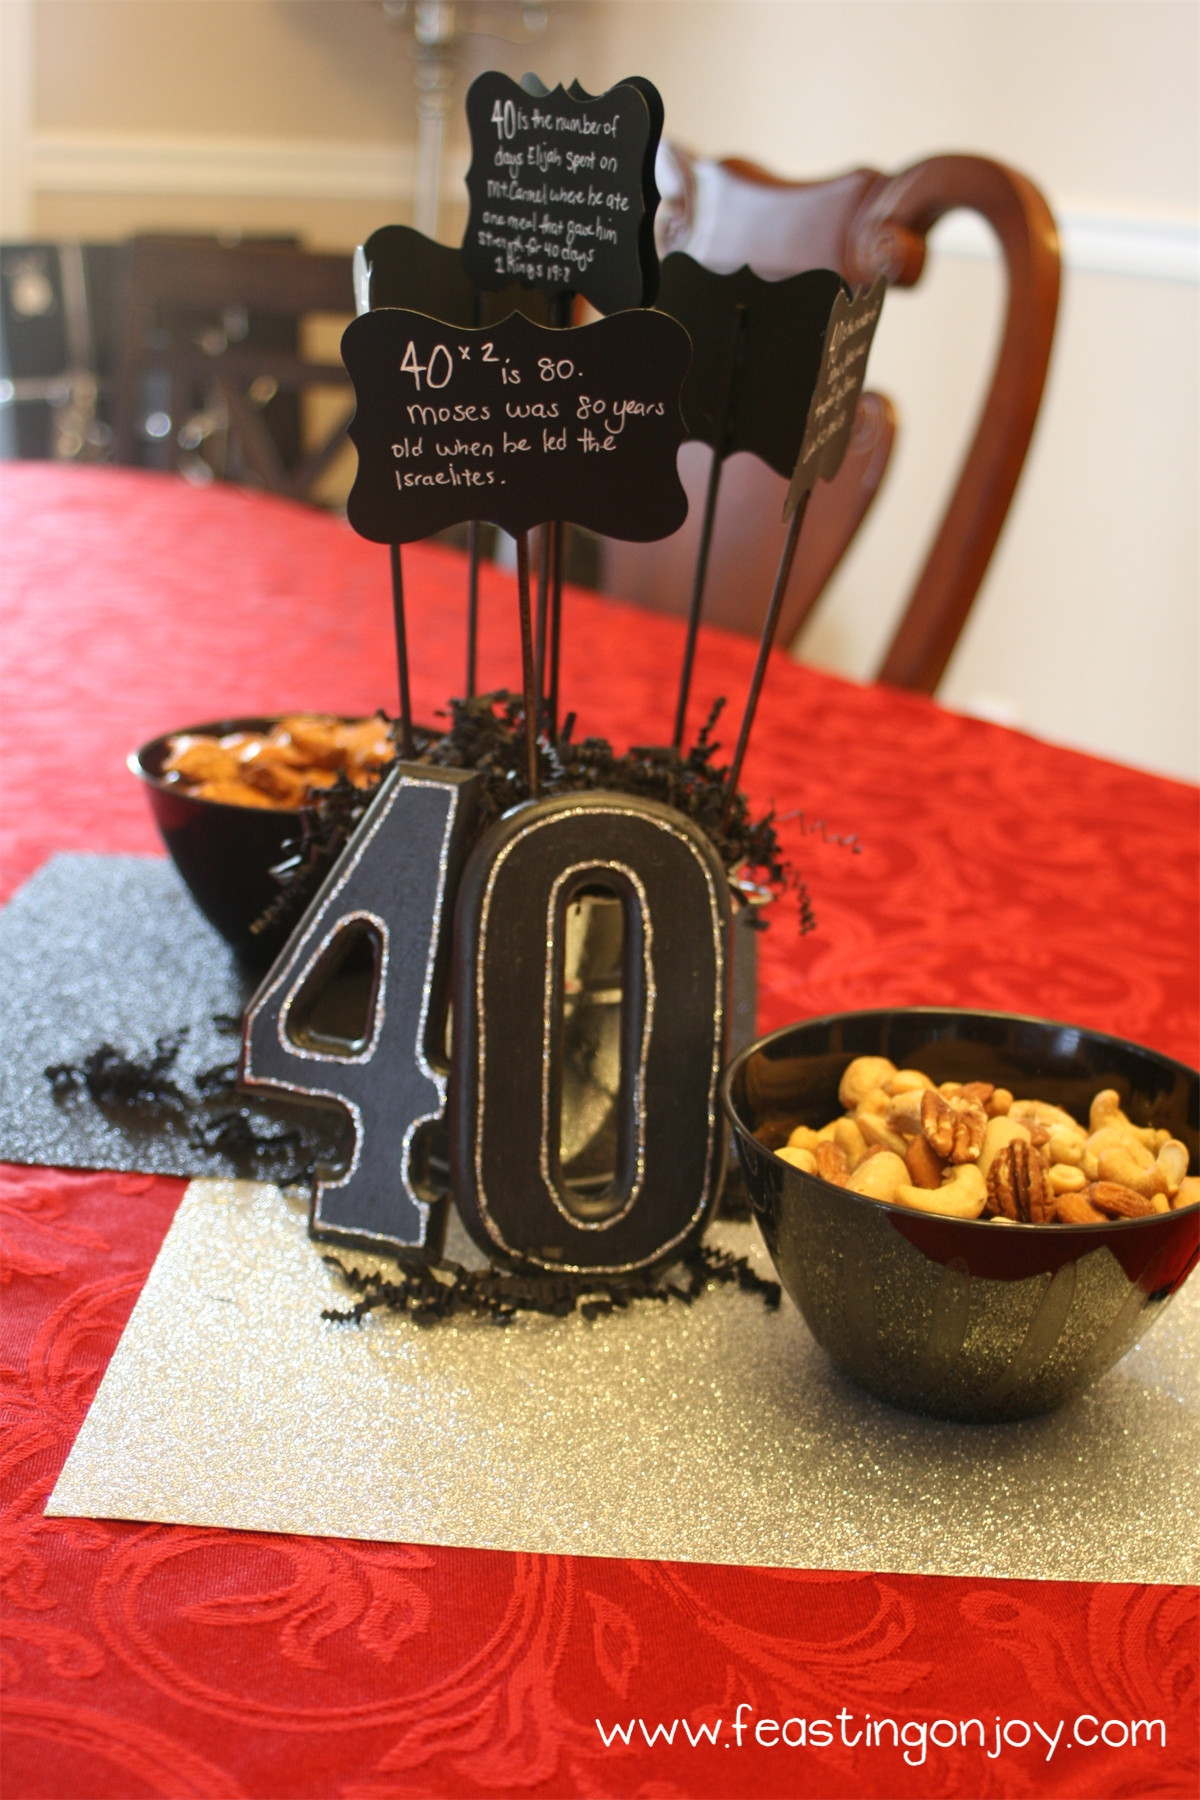 40th Birthday Party Ideas For Men
 A Christian themed manly surprise 40th birthday party